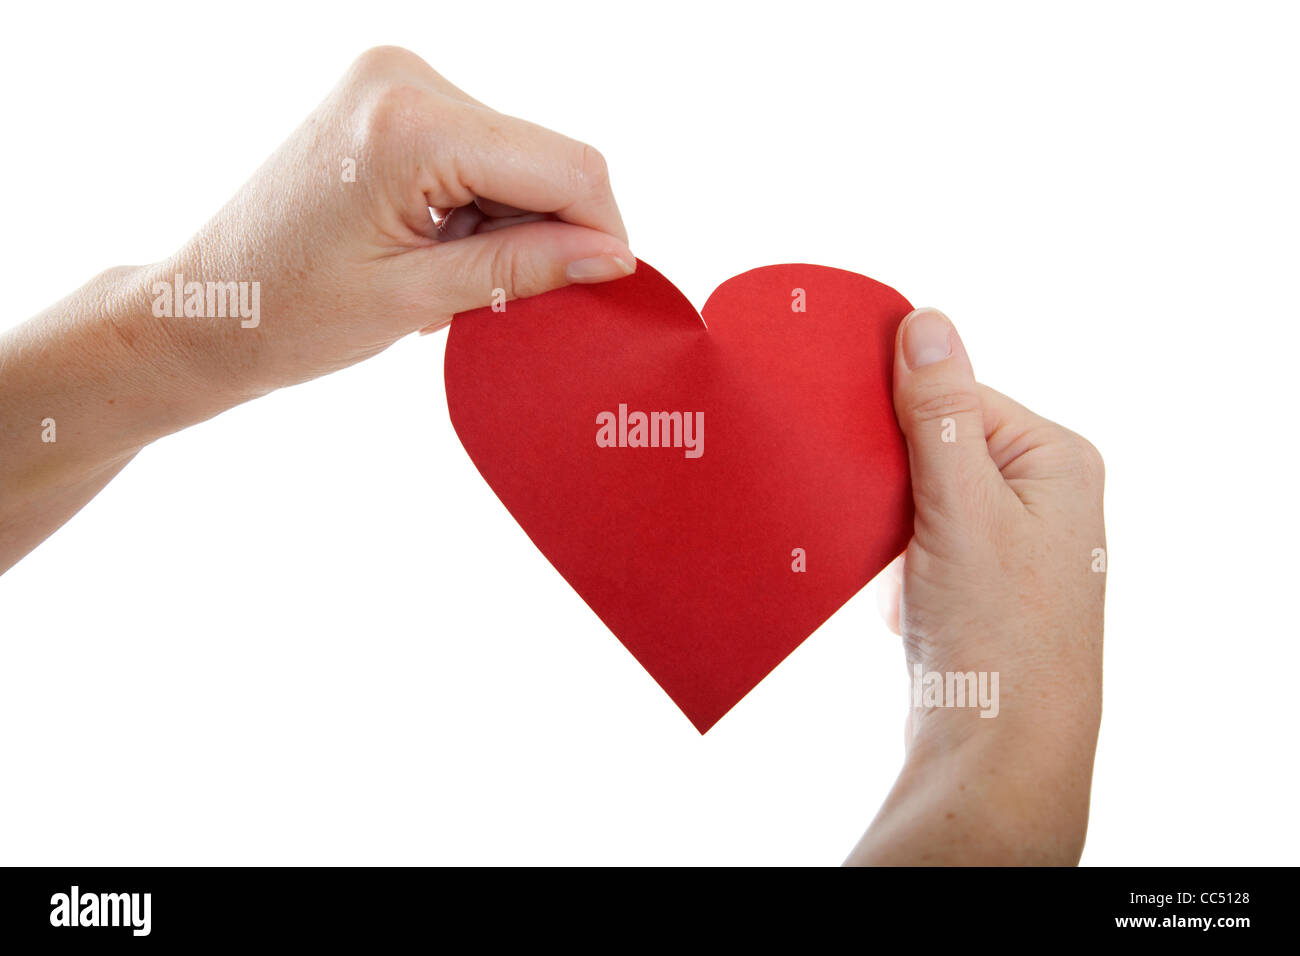 Hands about to tear paper heart Stock Photo